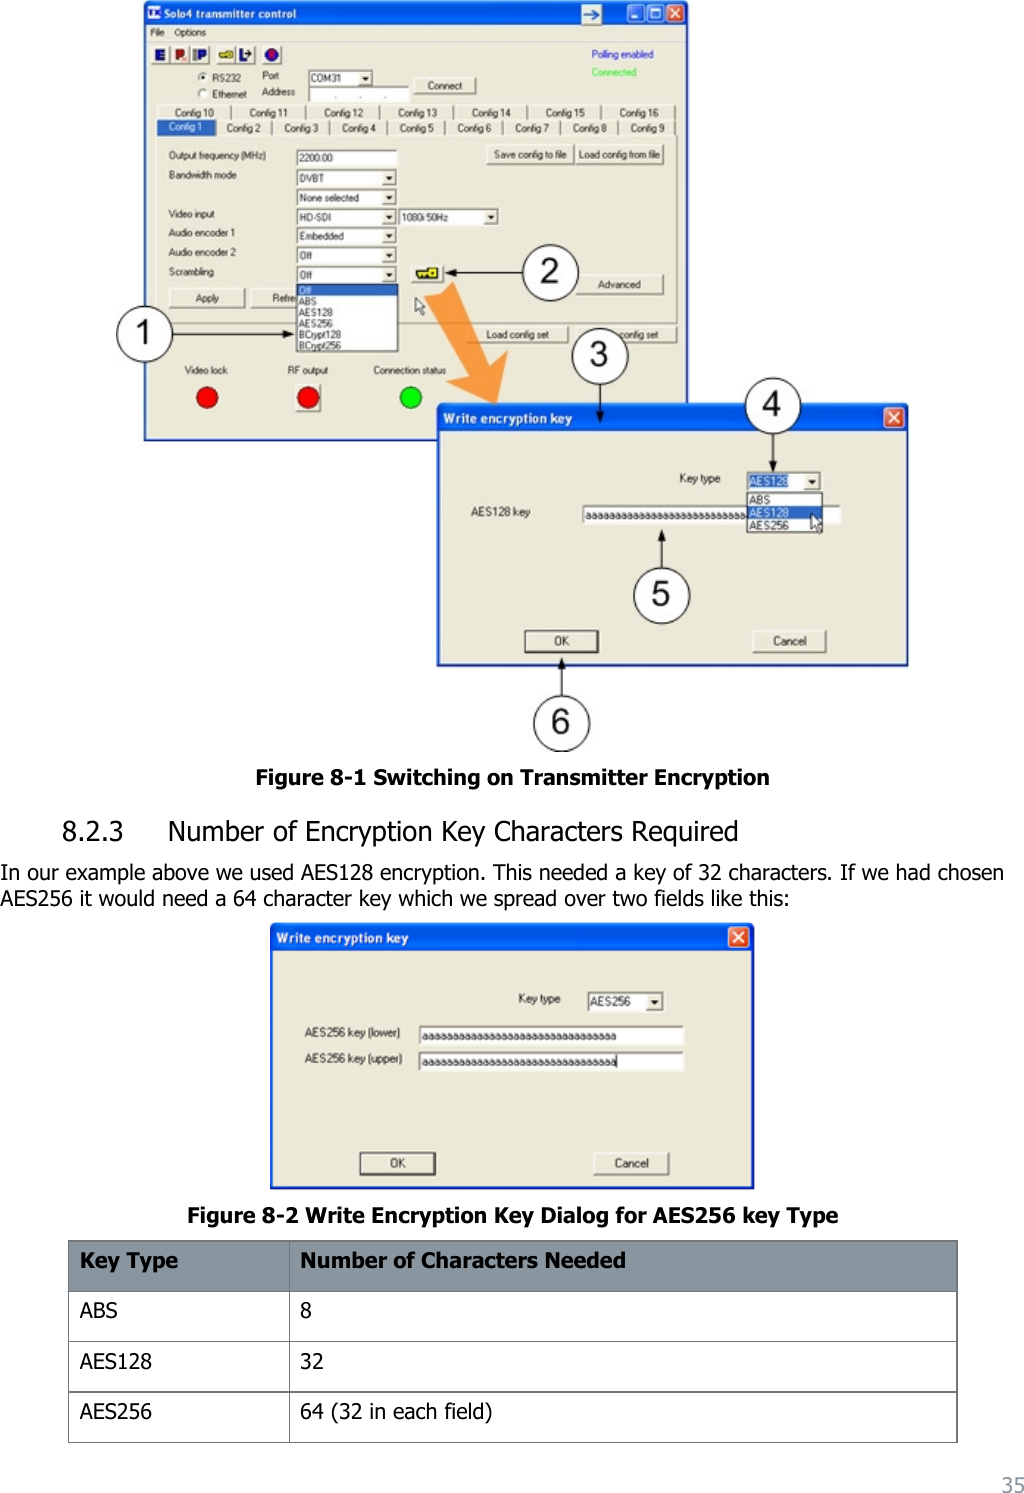 35   Figure 8-1 Switching on Transmitter Encryption 8.2.3 Number of Encryption Key Characters Required In our example above we used AES128 encryption. This needed a key of 32 characters. If we had chosen AES256 it would need a 64 character key which we spread over two fields like this:  Figure 8-2 Write Encryption Key Dialog for AES256 key Type Key Type Number of Characters Needed ABS 8 AES128 32 AES256 64 (32 in each field) 